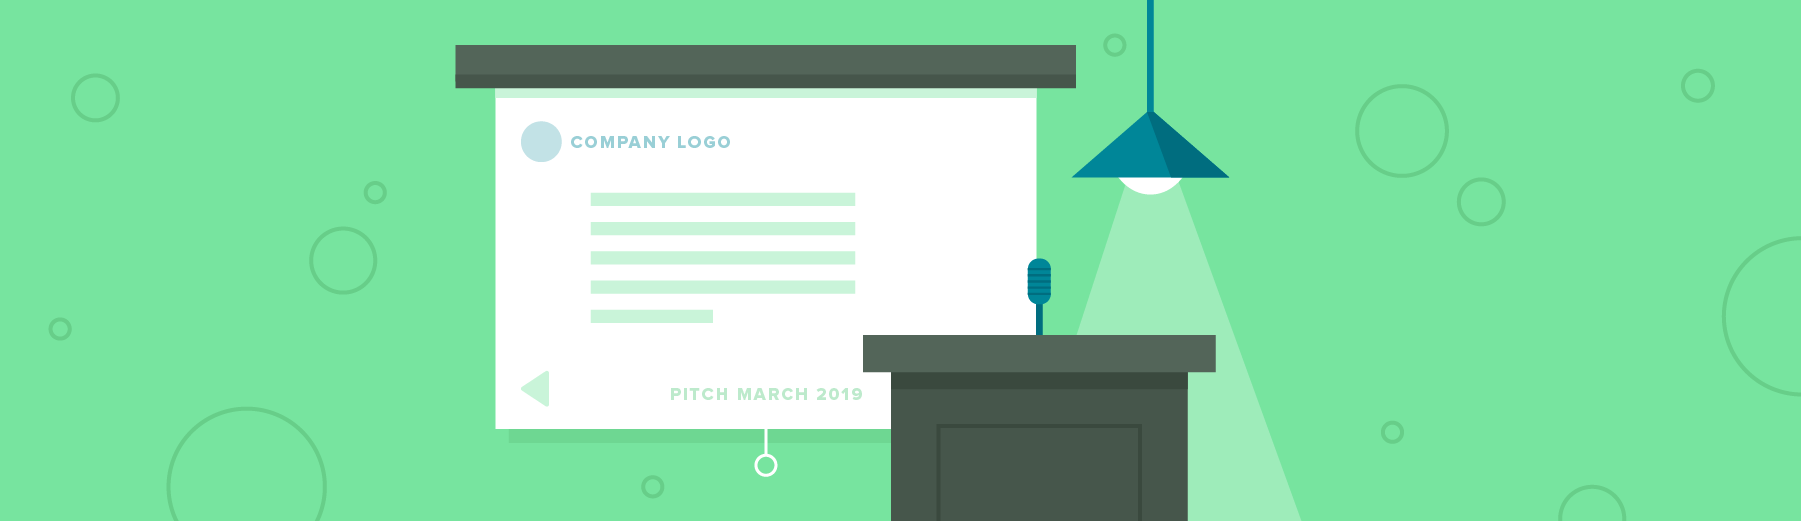 pitch deck examples